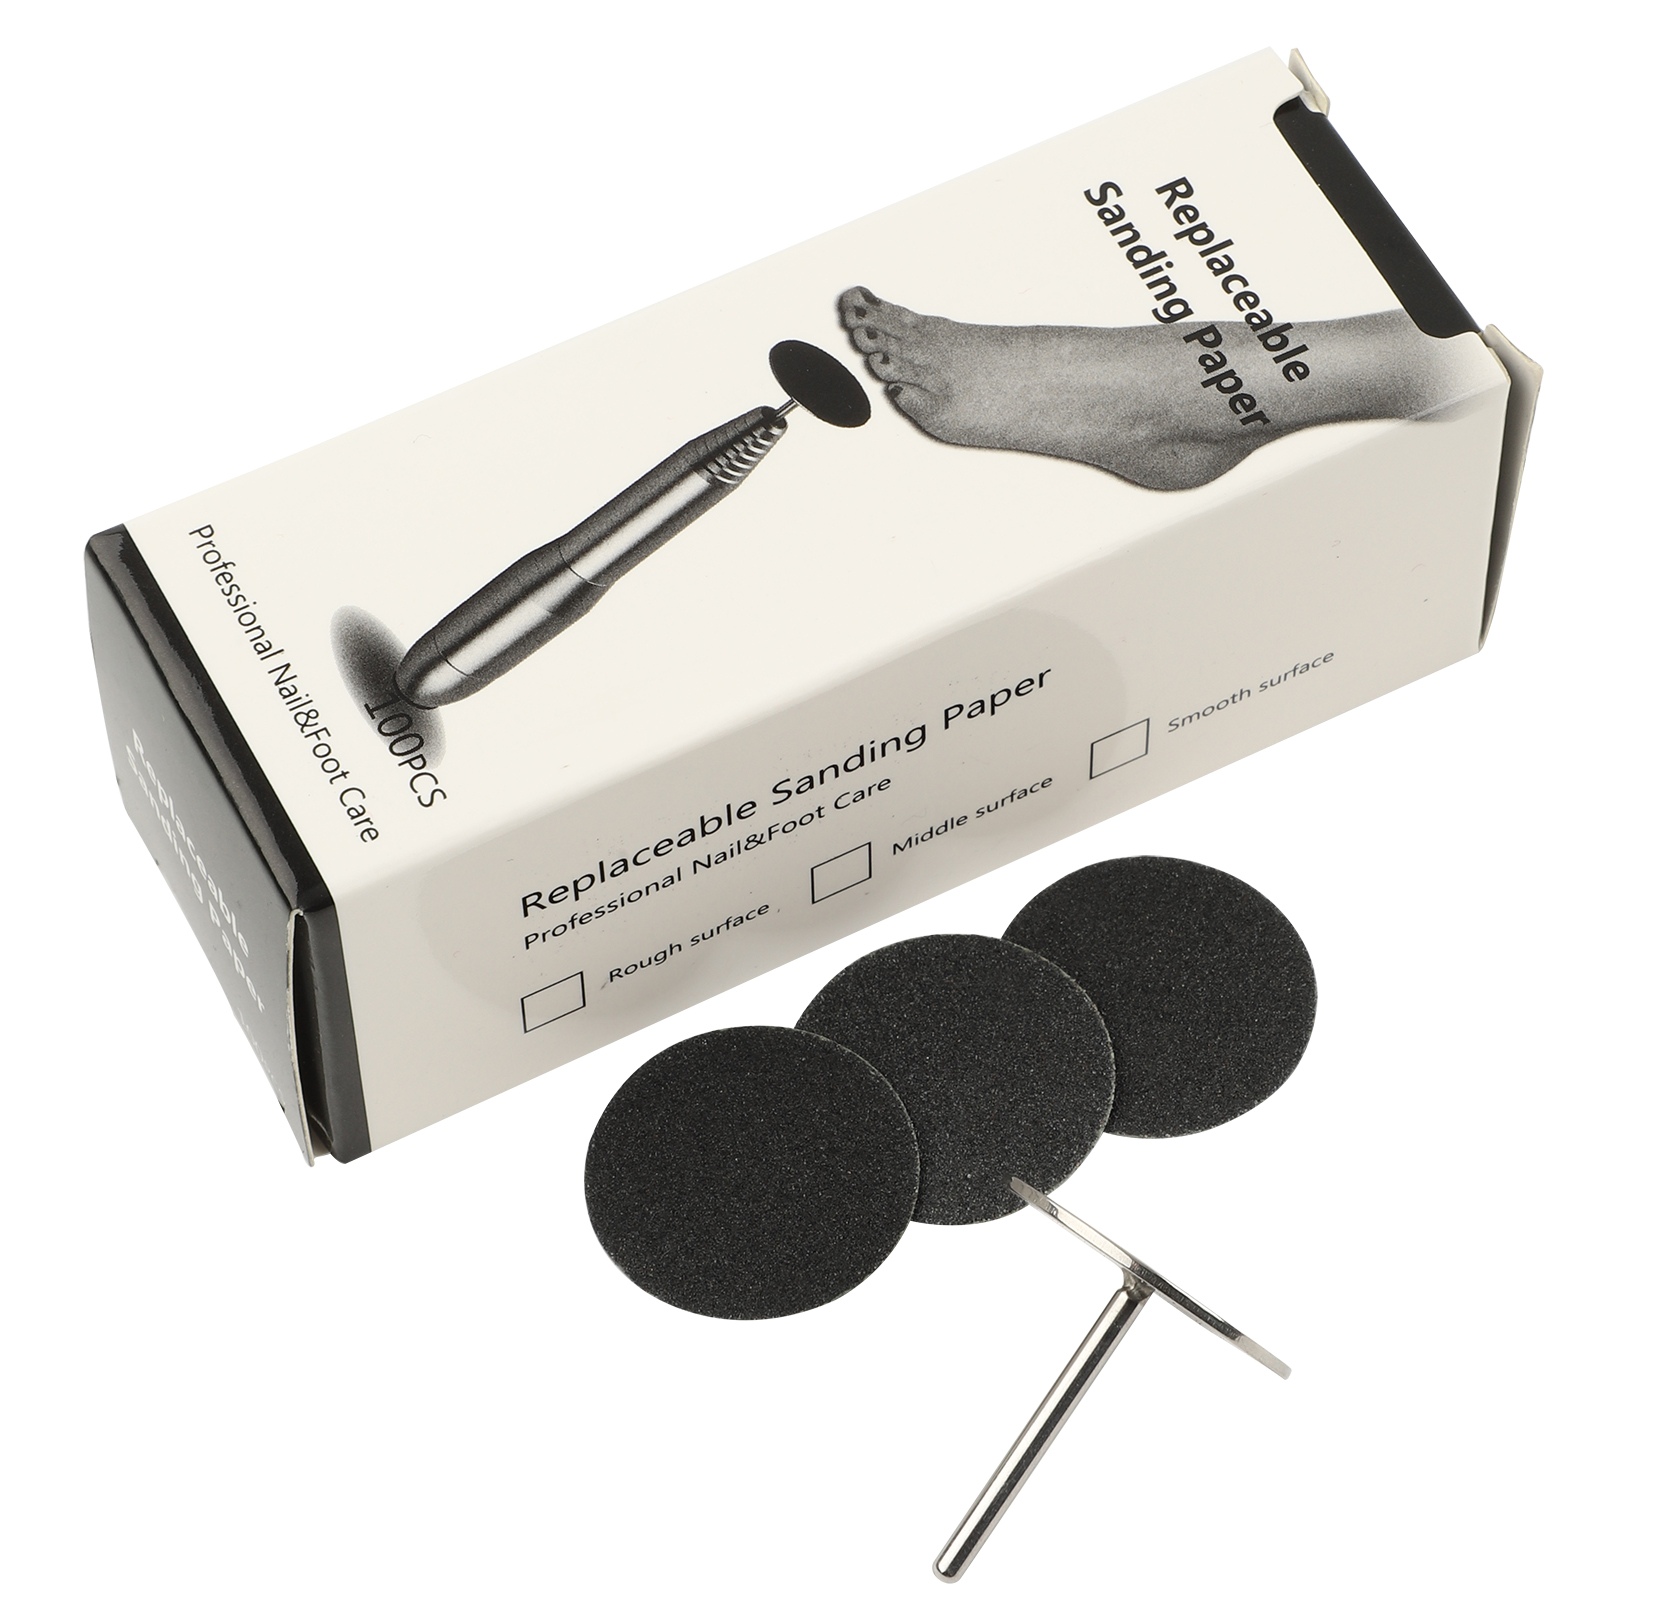 replaceable sanding paper dia 35mm and mandrel for Pedicure to remove dead skin